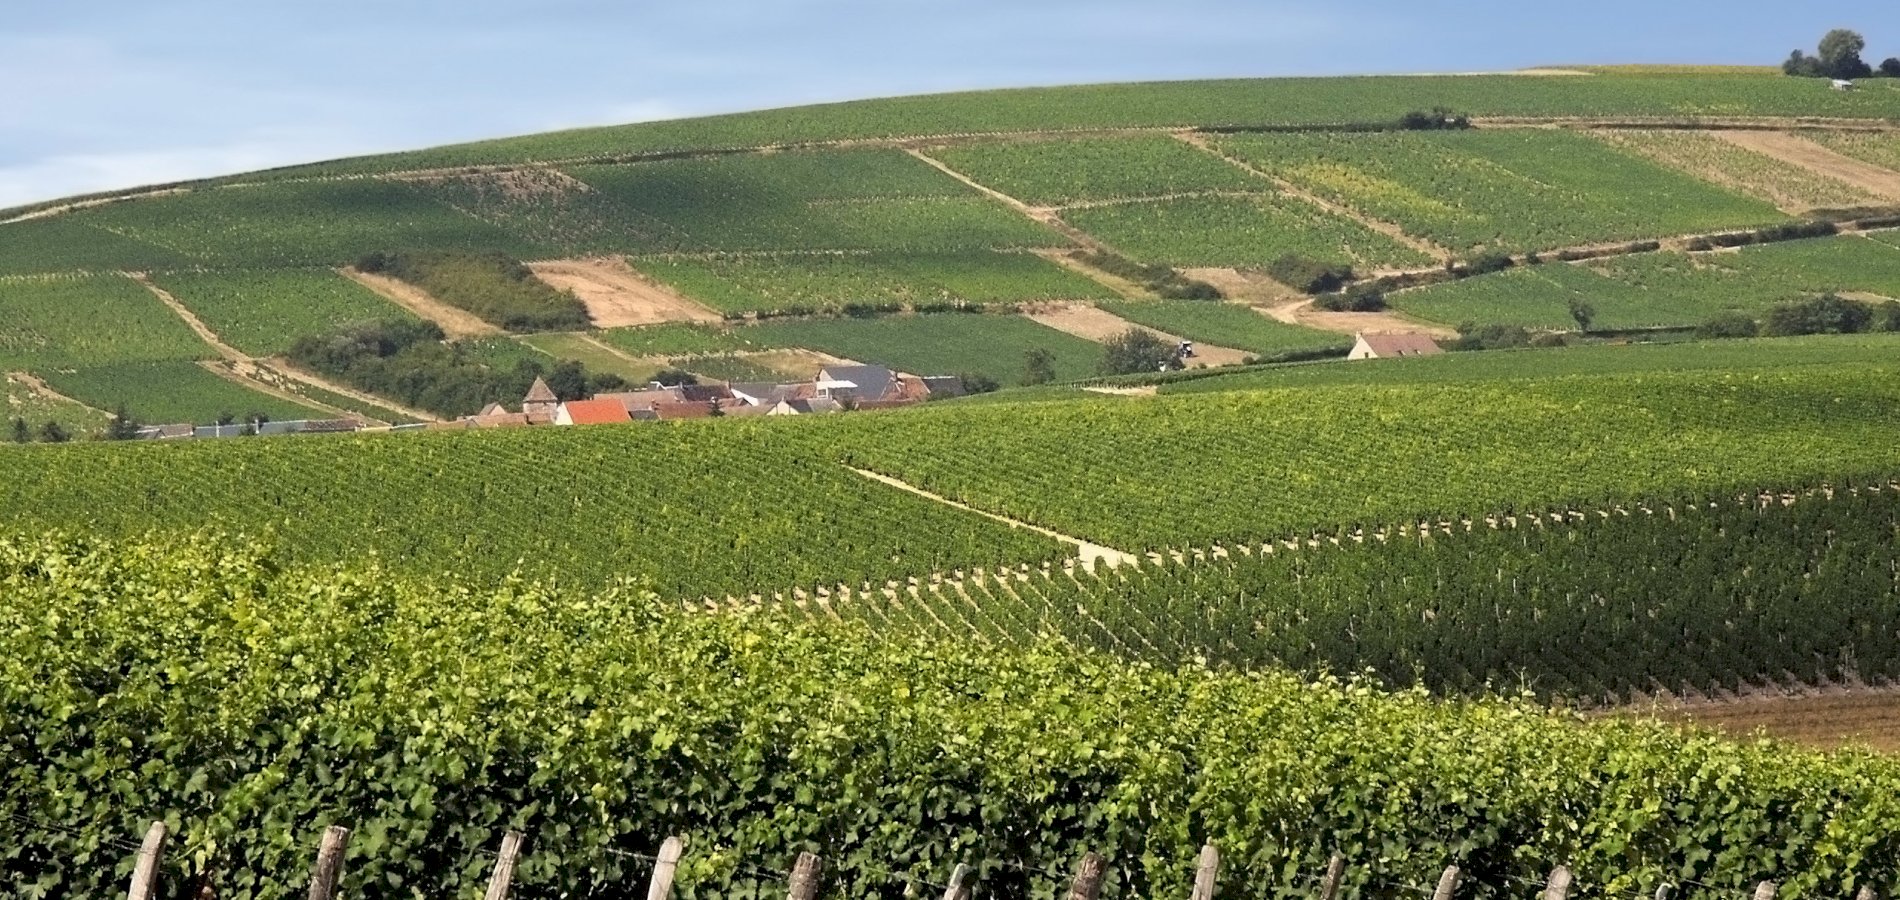 Ophorus Tours - A Private Loire Valley Wine Tour from Tours to Chinon & Bourgueil wine regions